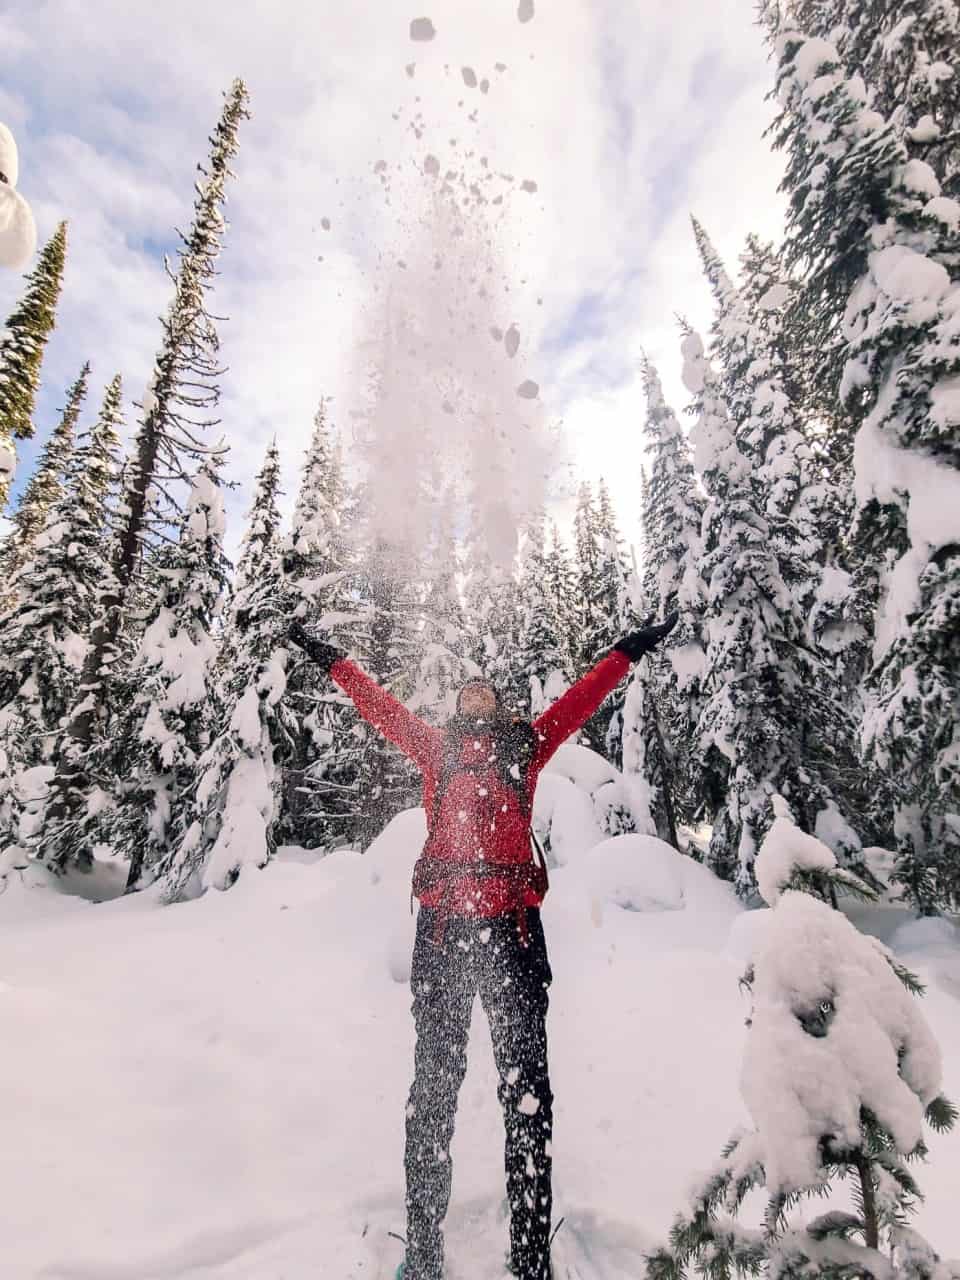 Silverstar Provincial Park - Snowshoeing at Silverstar Provincial Park